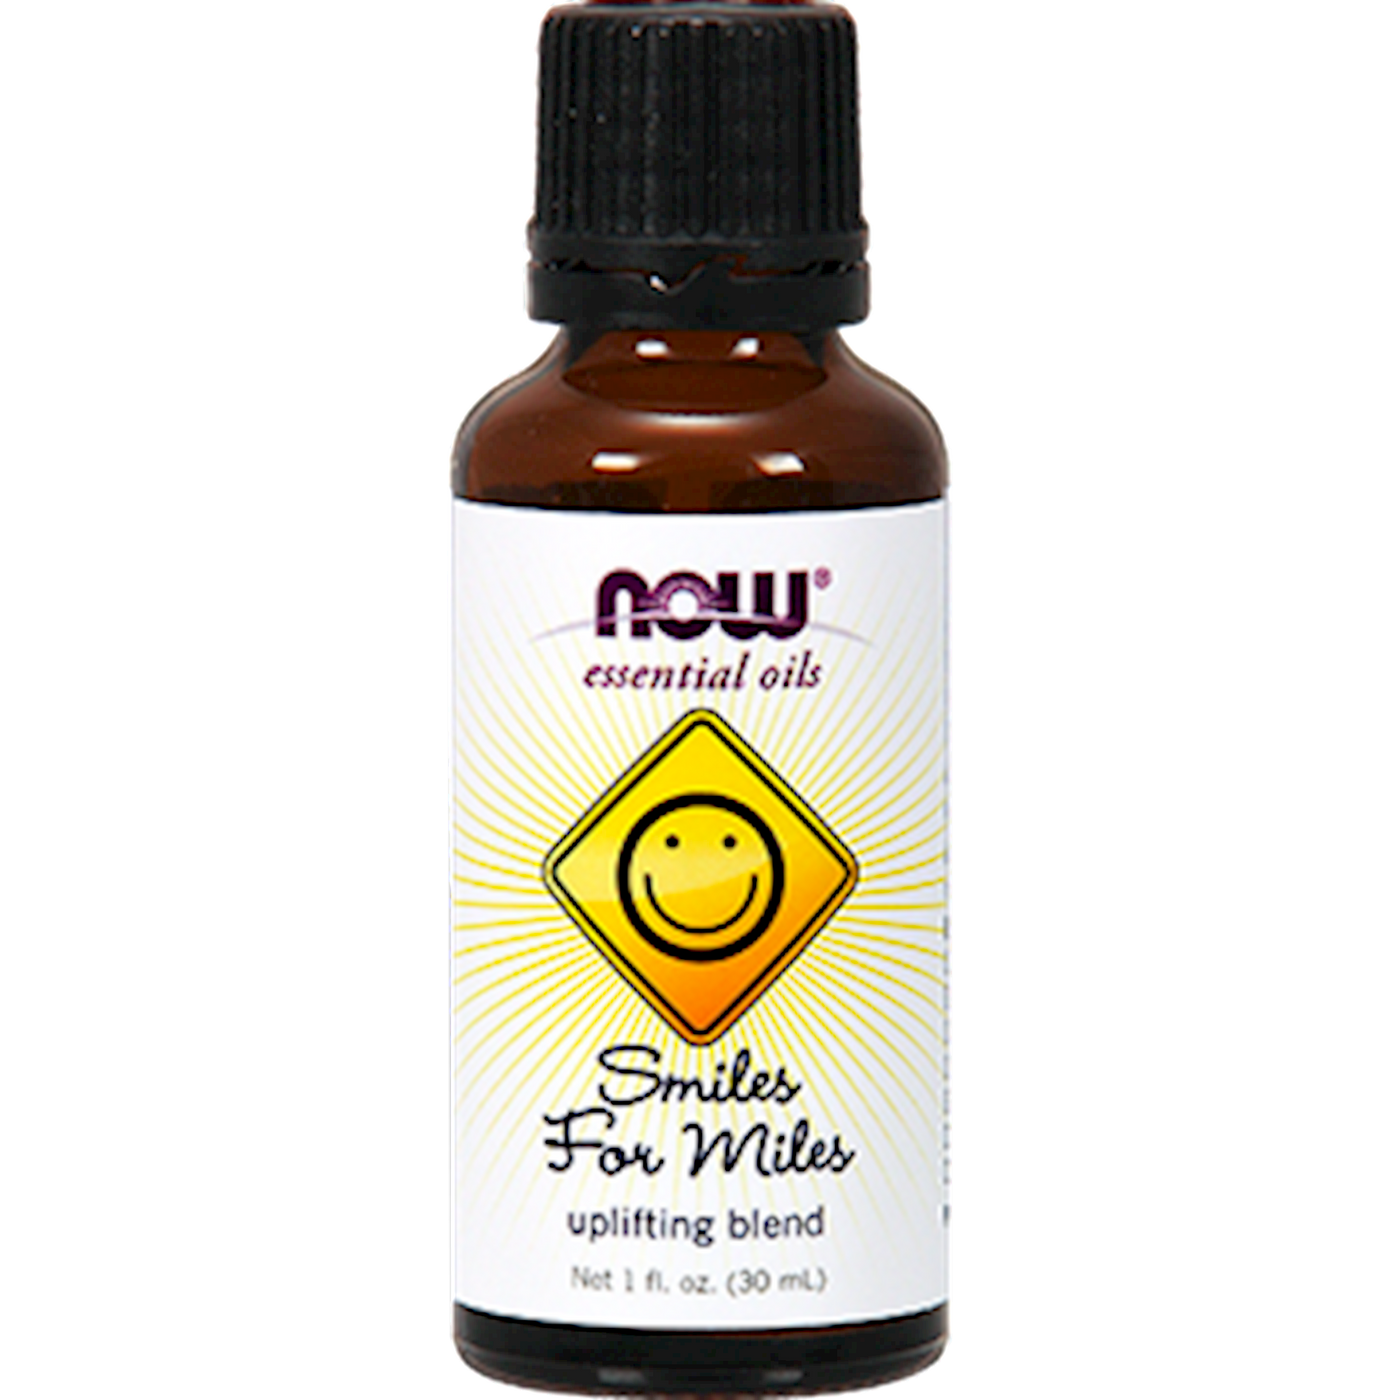 Smile for Miles Oil Blend 1 fl oz Curated Wellness